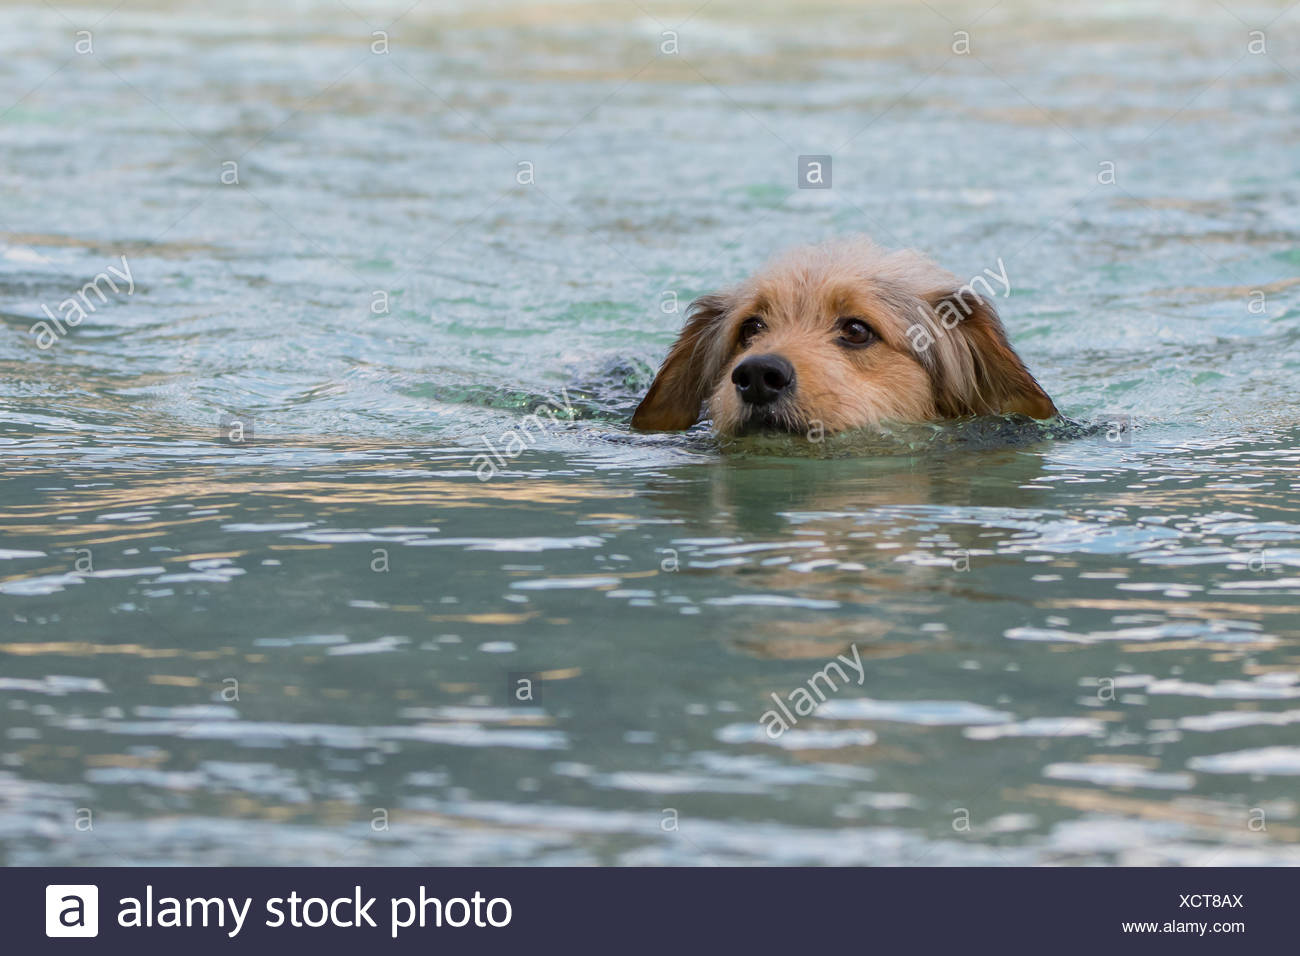 Bosnian Coarse Haired Hound Or Barak Dog Canis Lupus Familiaris Is Swimming In A River Mixed Breed Tyrol Austria Stock Photo Alamy